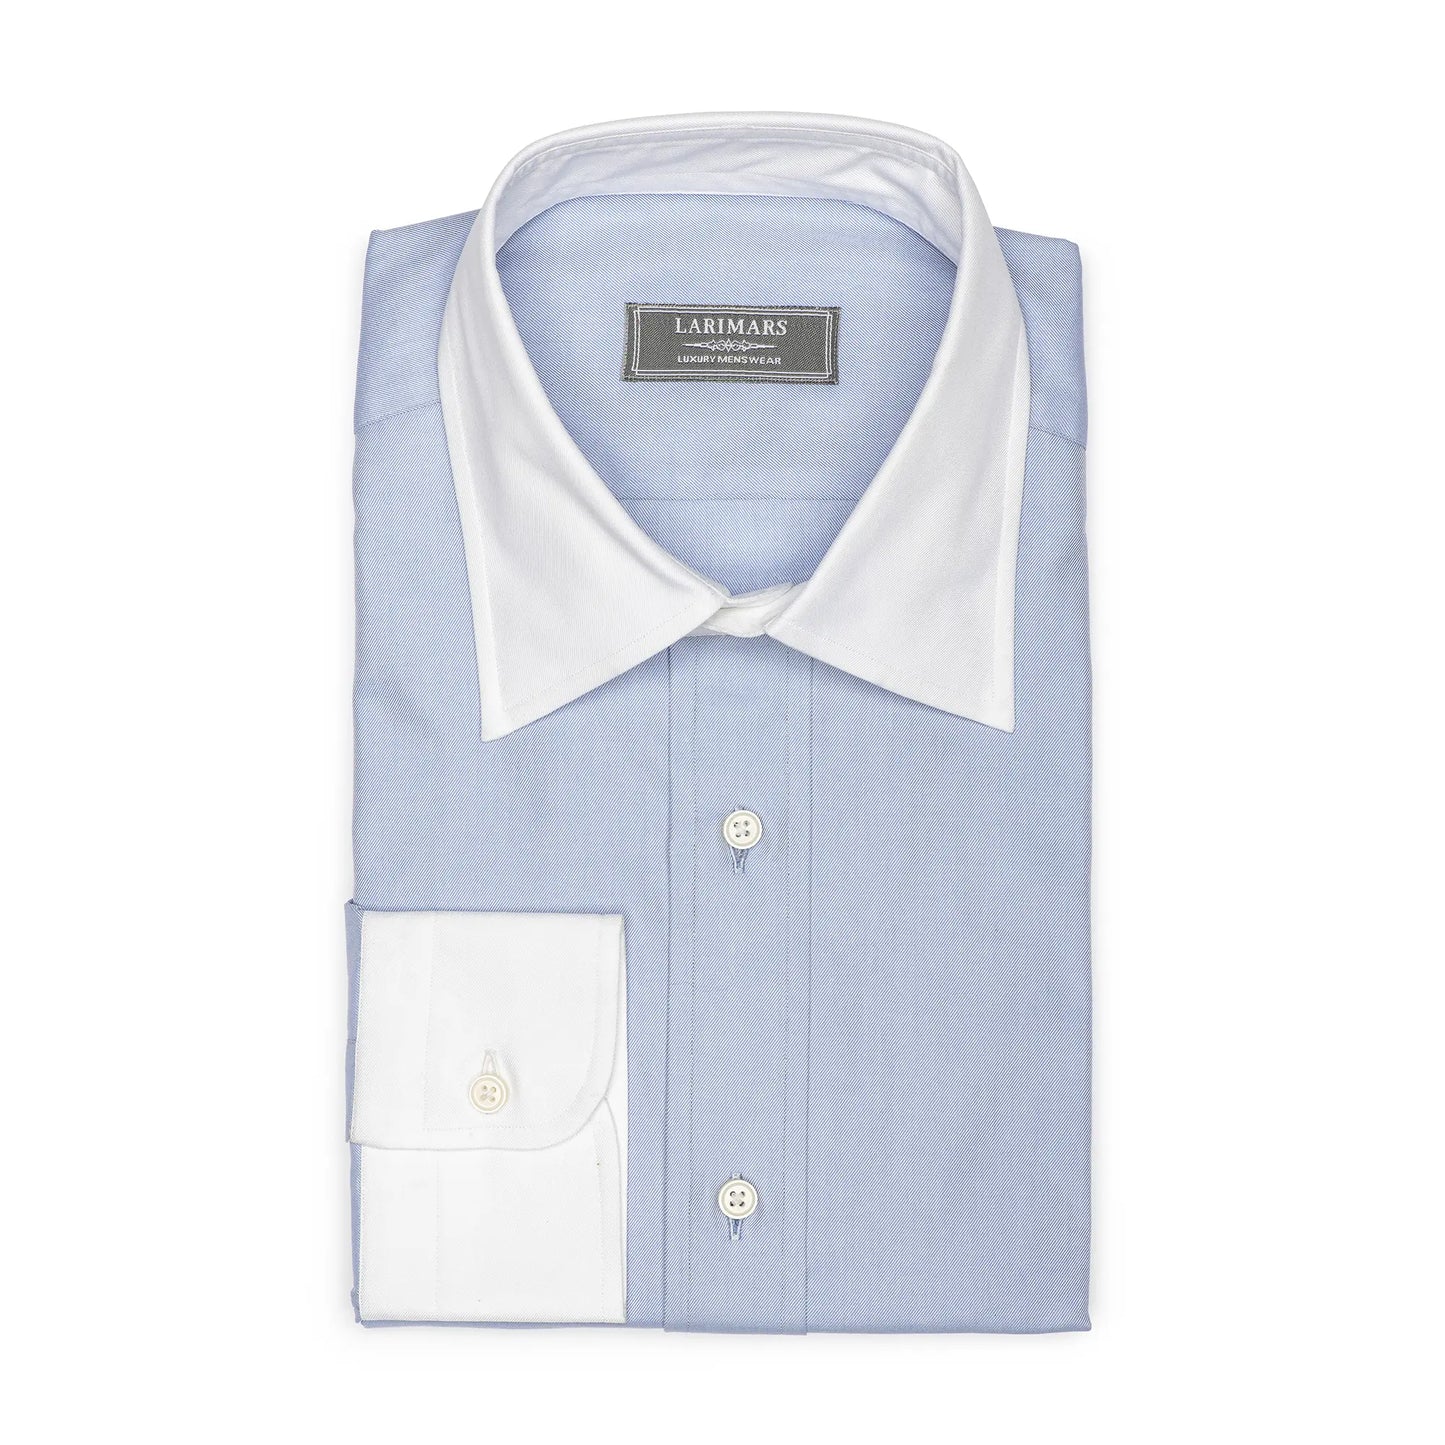 Medium Blue Fine Twill - White Point Collar - Larimars Clothing Men's Formal and casual wear shirts